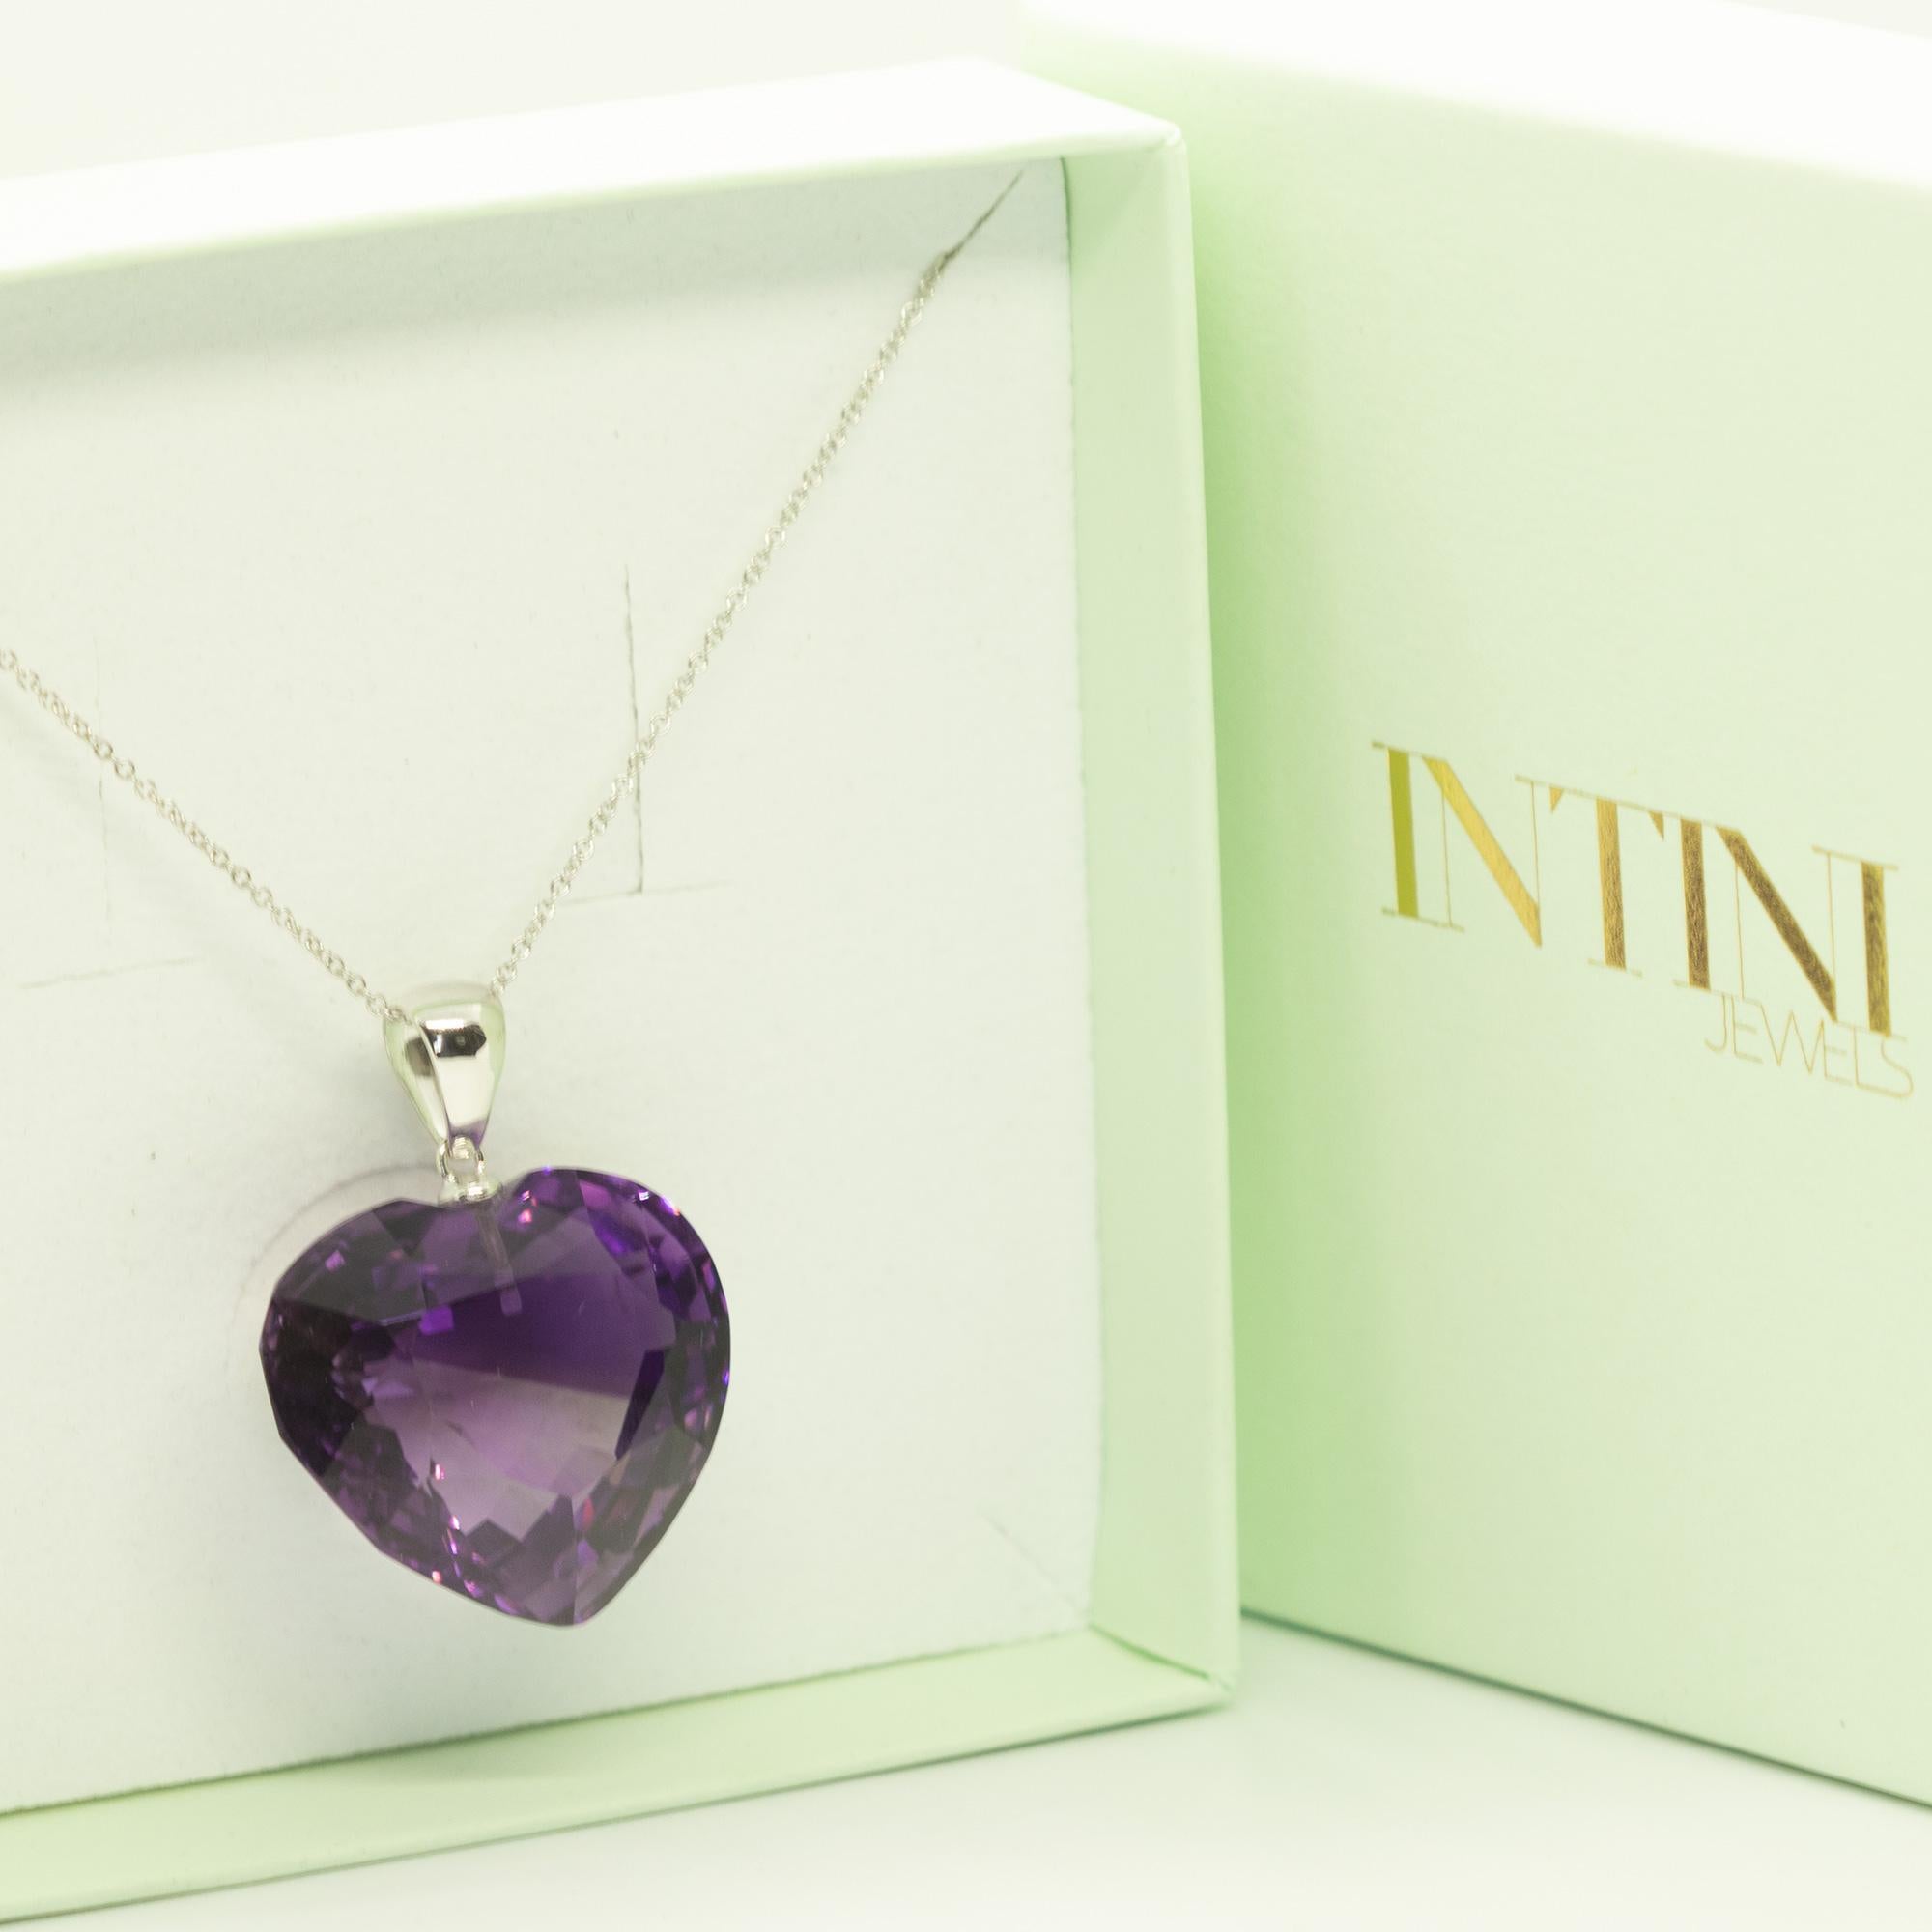 Intini Jewels 51.95 Carats Amethyst Heart 18 Karat White Gold Pendant Necklace For Sale 1